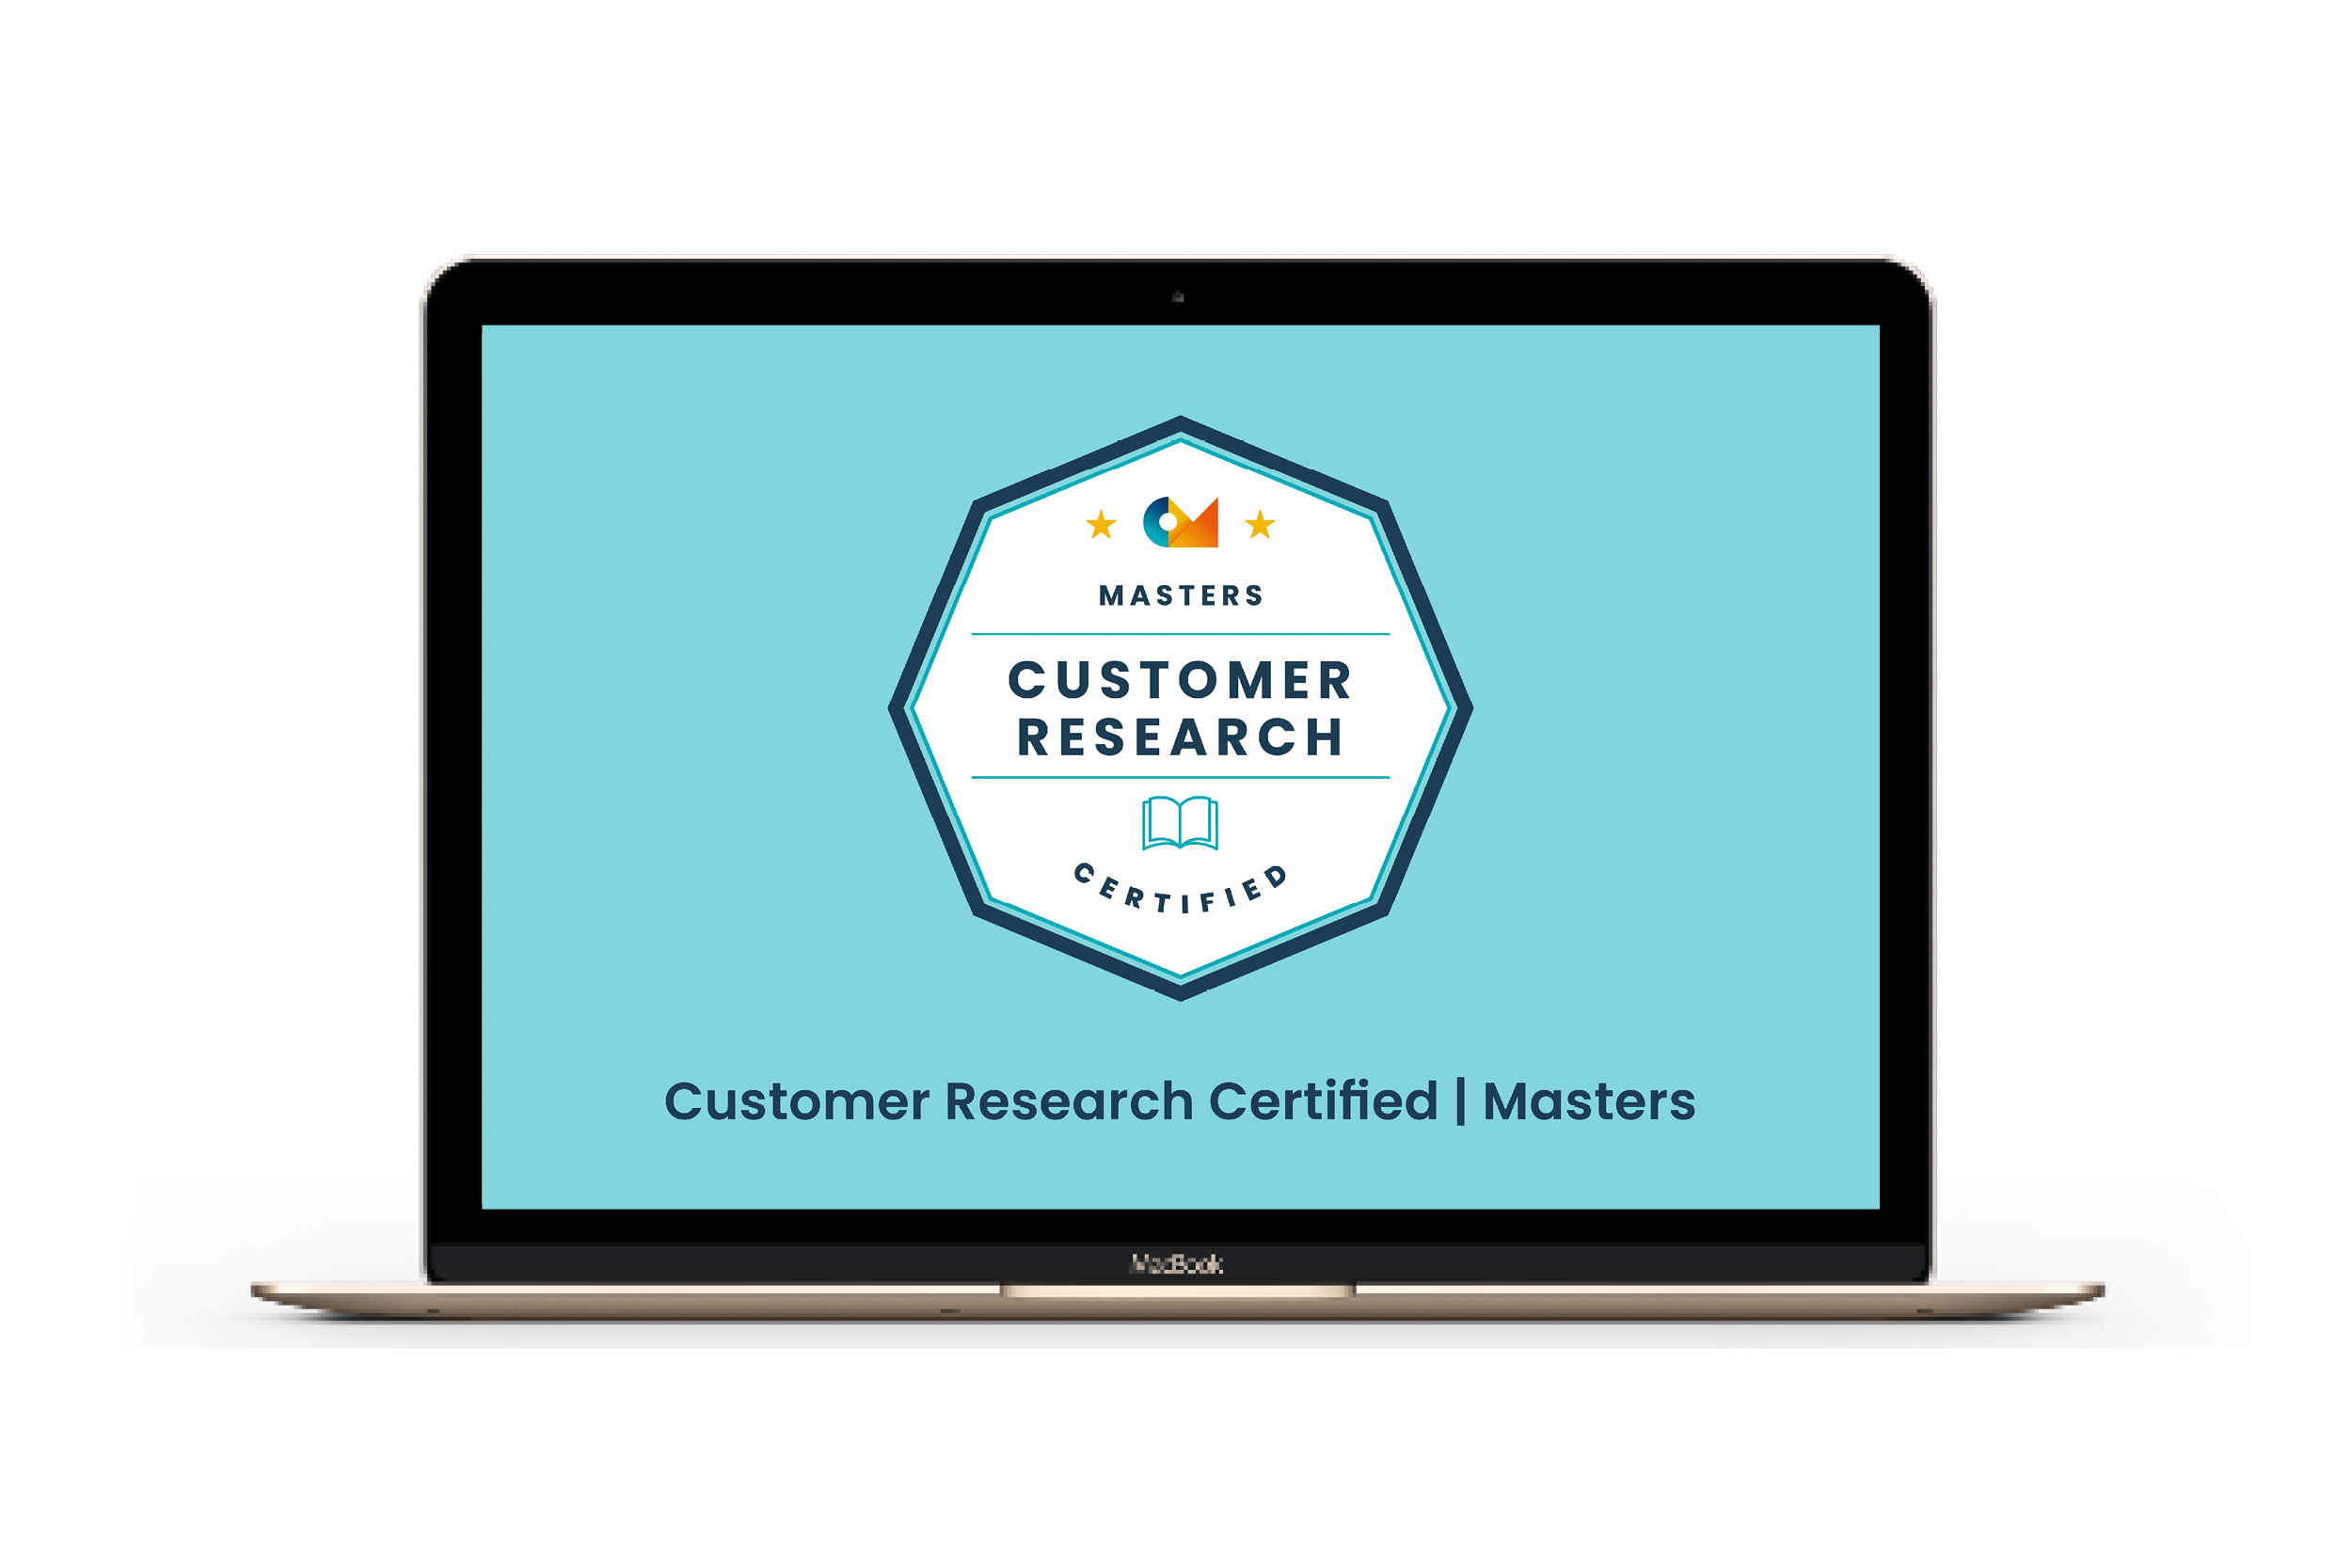 Customer Research Certified | Masters laptop image